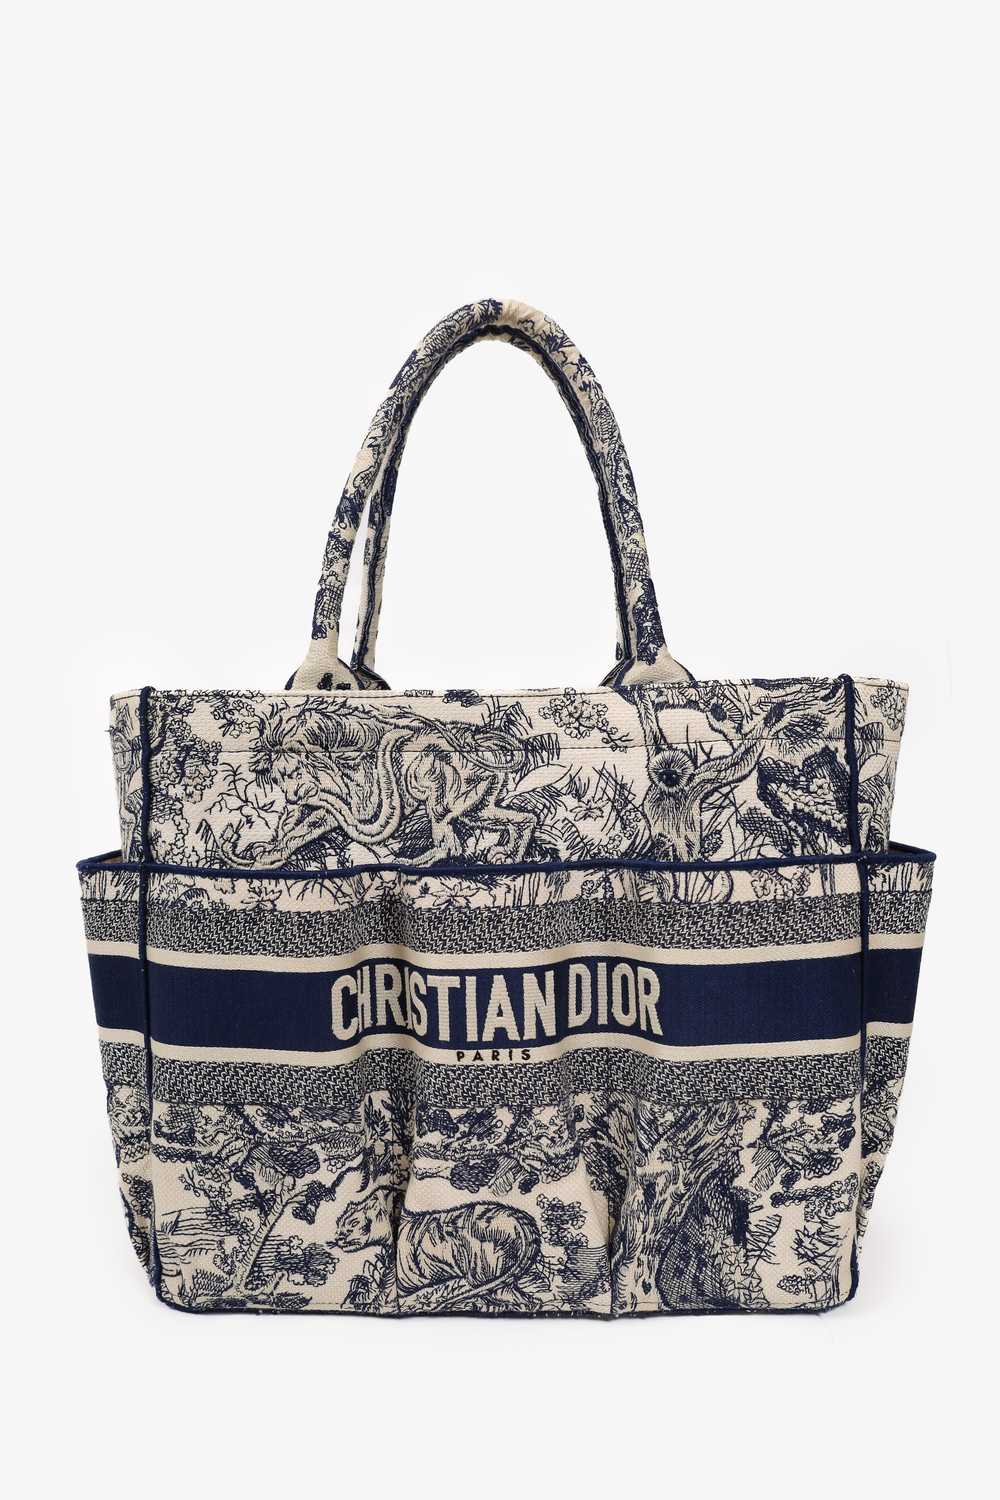 Christian Dior 2020 Navy/White Canvas Embroidered… - image 5